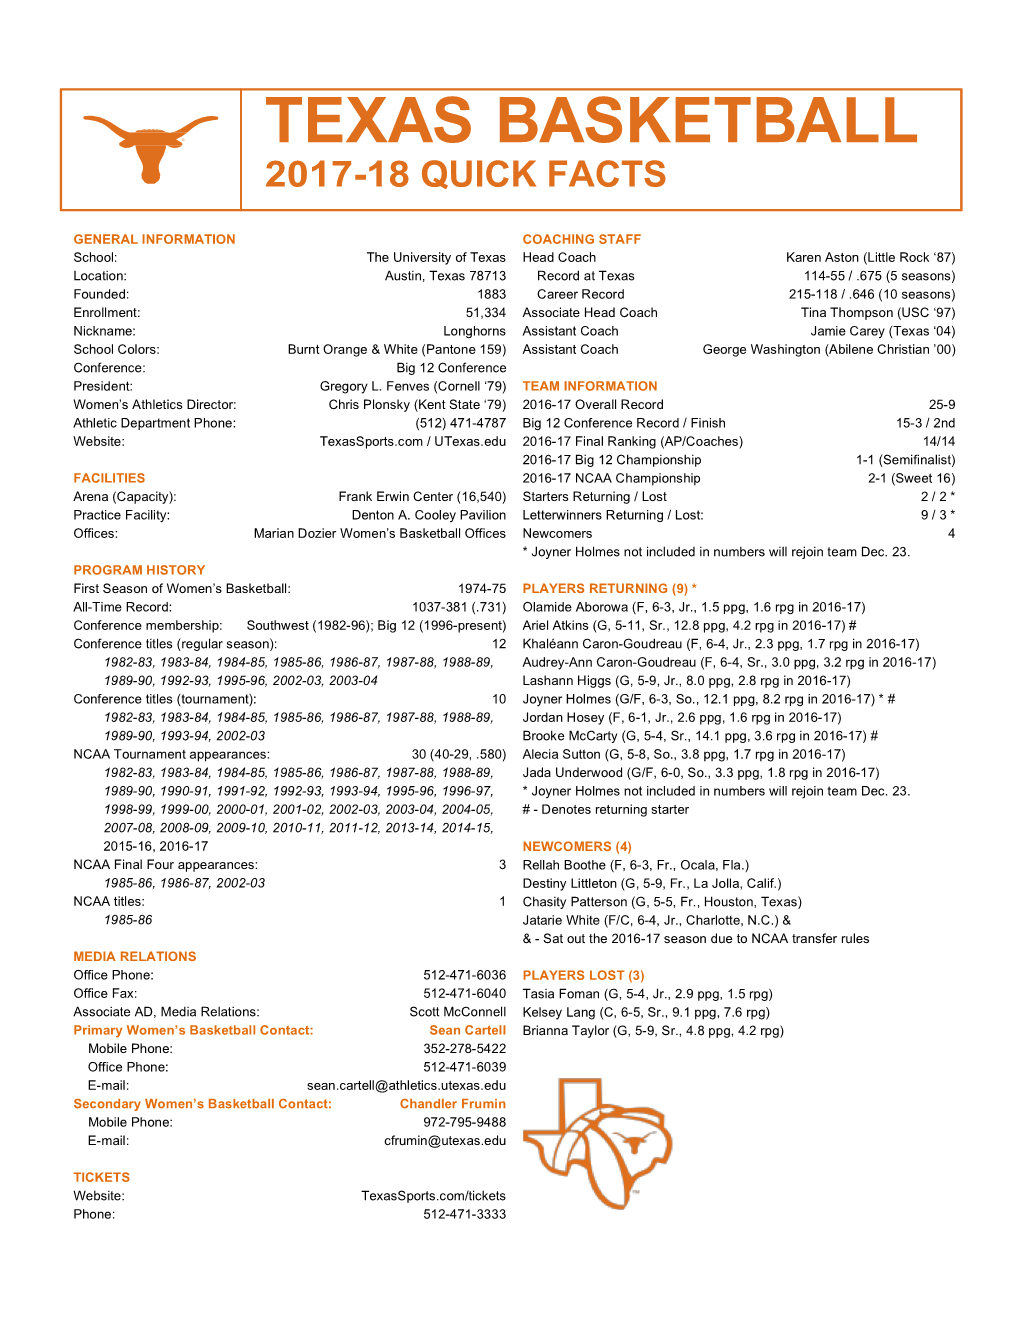 Quick Facts Wbb 2017-18